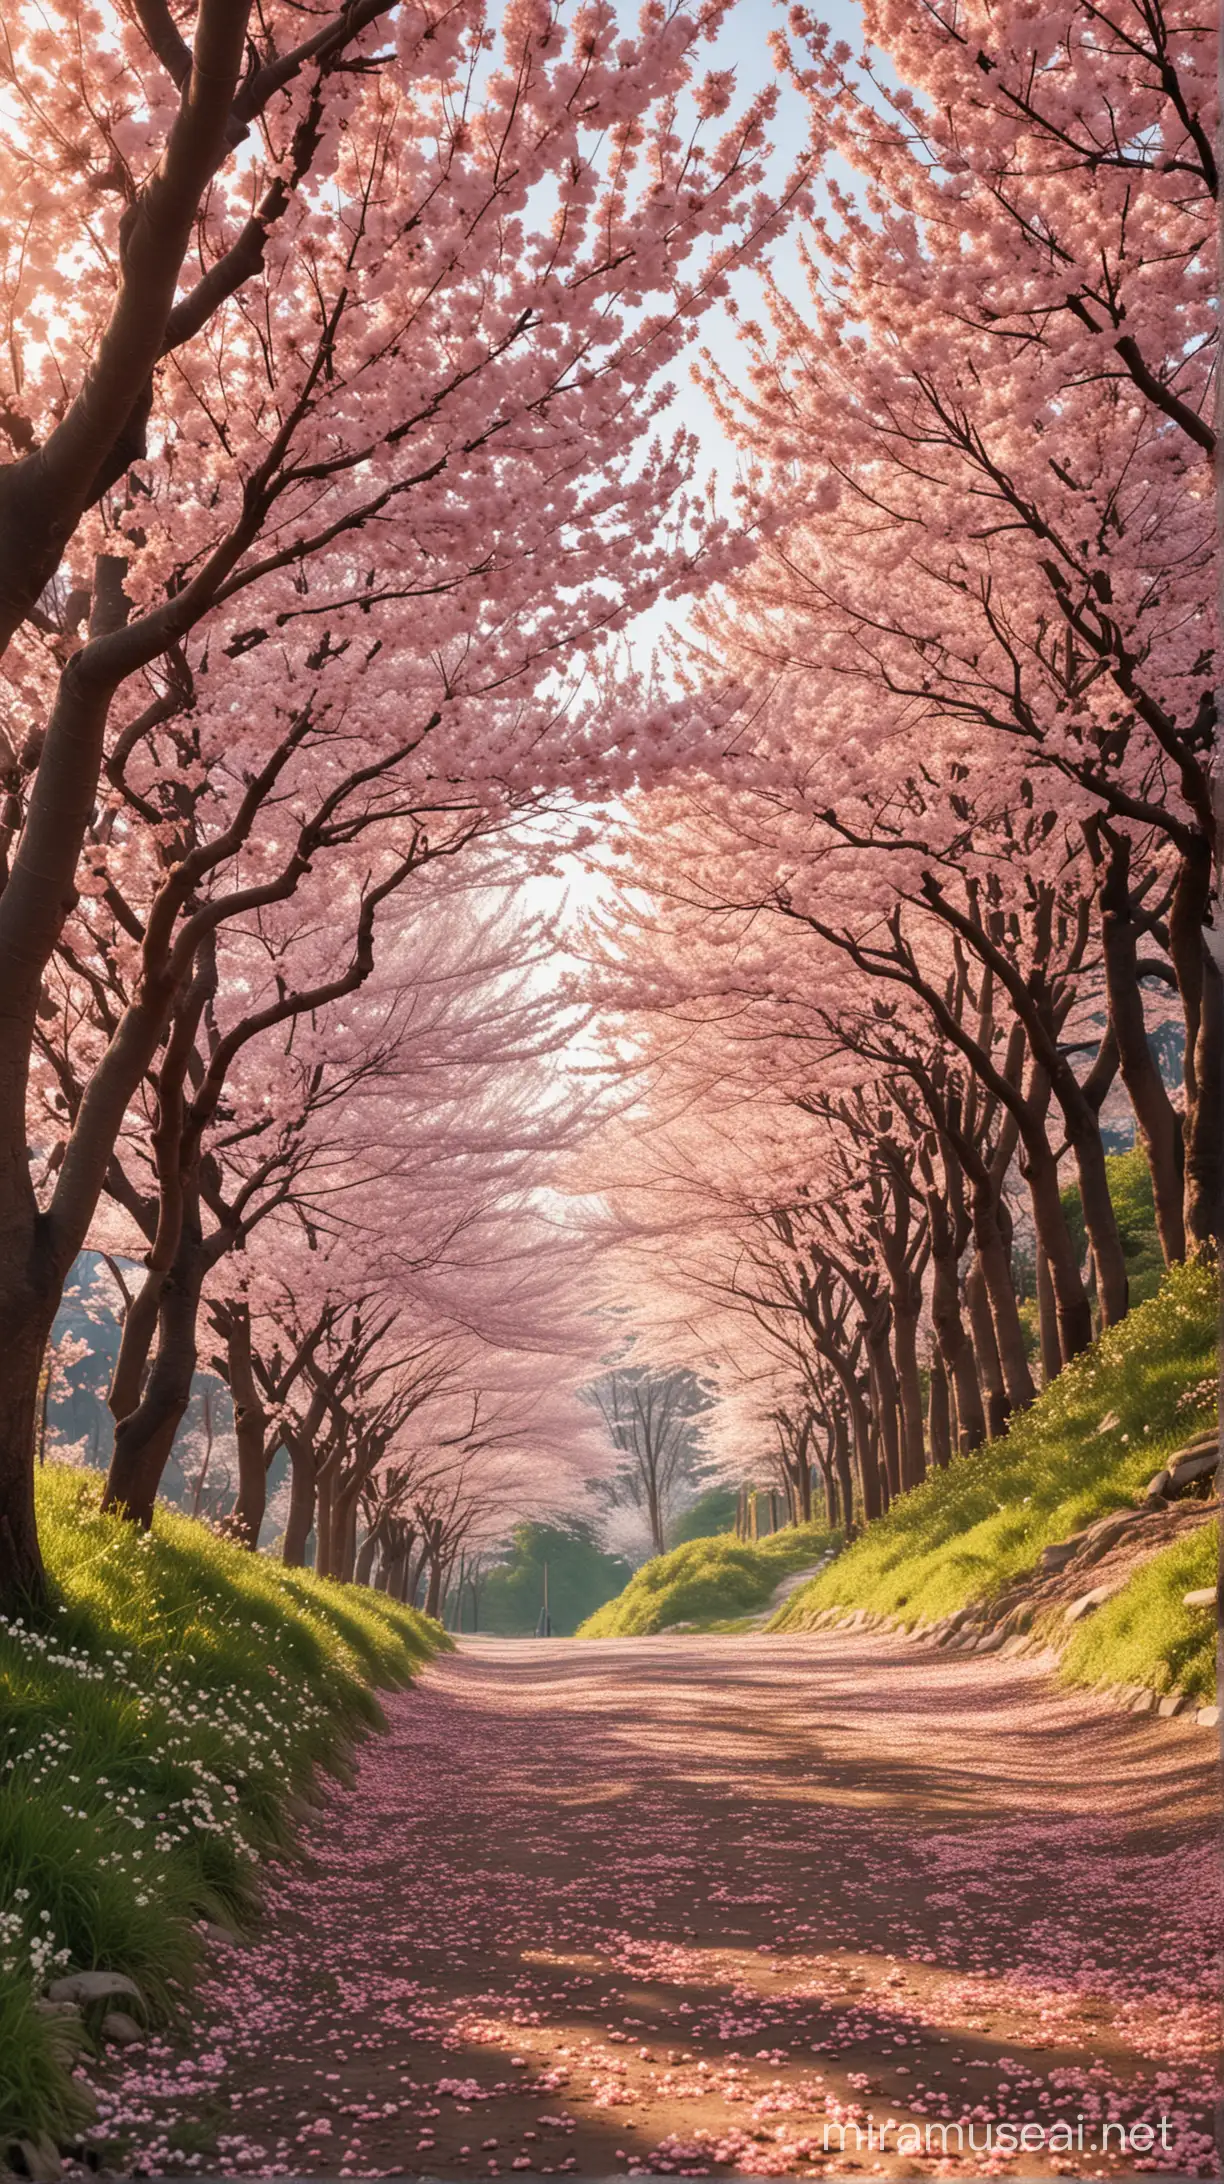 A breathtakingly beautiful real-life photograph of a small hill lined with first bloomed cherry blossom trees, the plenty of cherry blossom petals, sunlight filtering through the petals creating a serene and magical atmosphere, masterpiece,best quality, highres, 8K photograph, Nikon